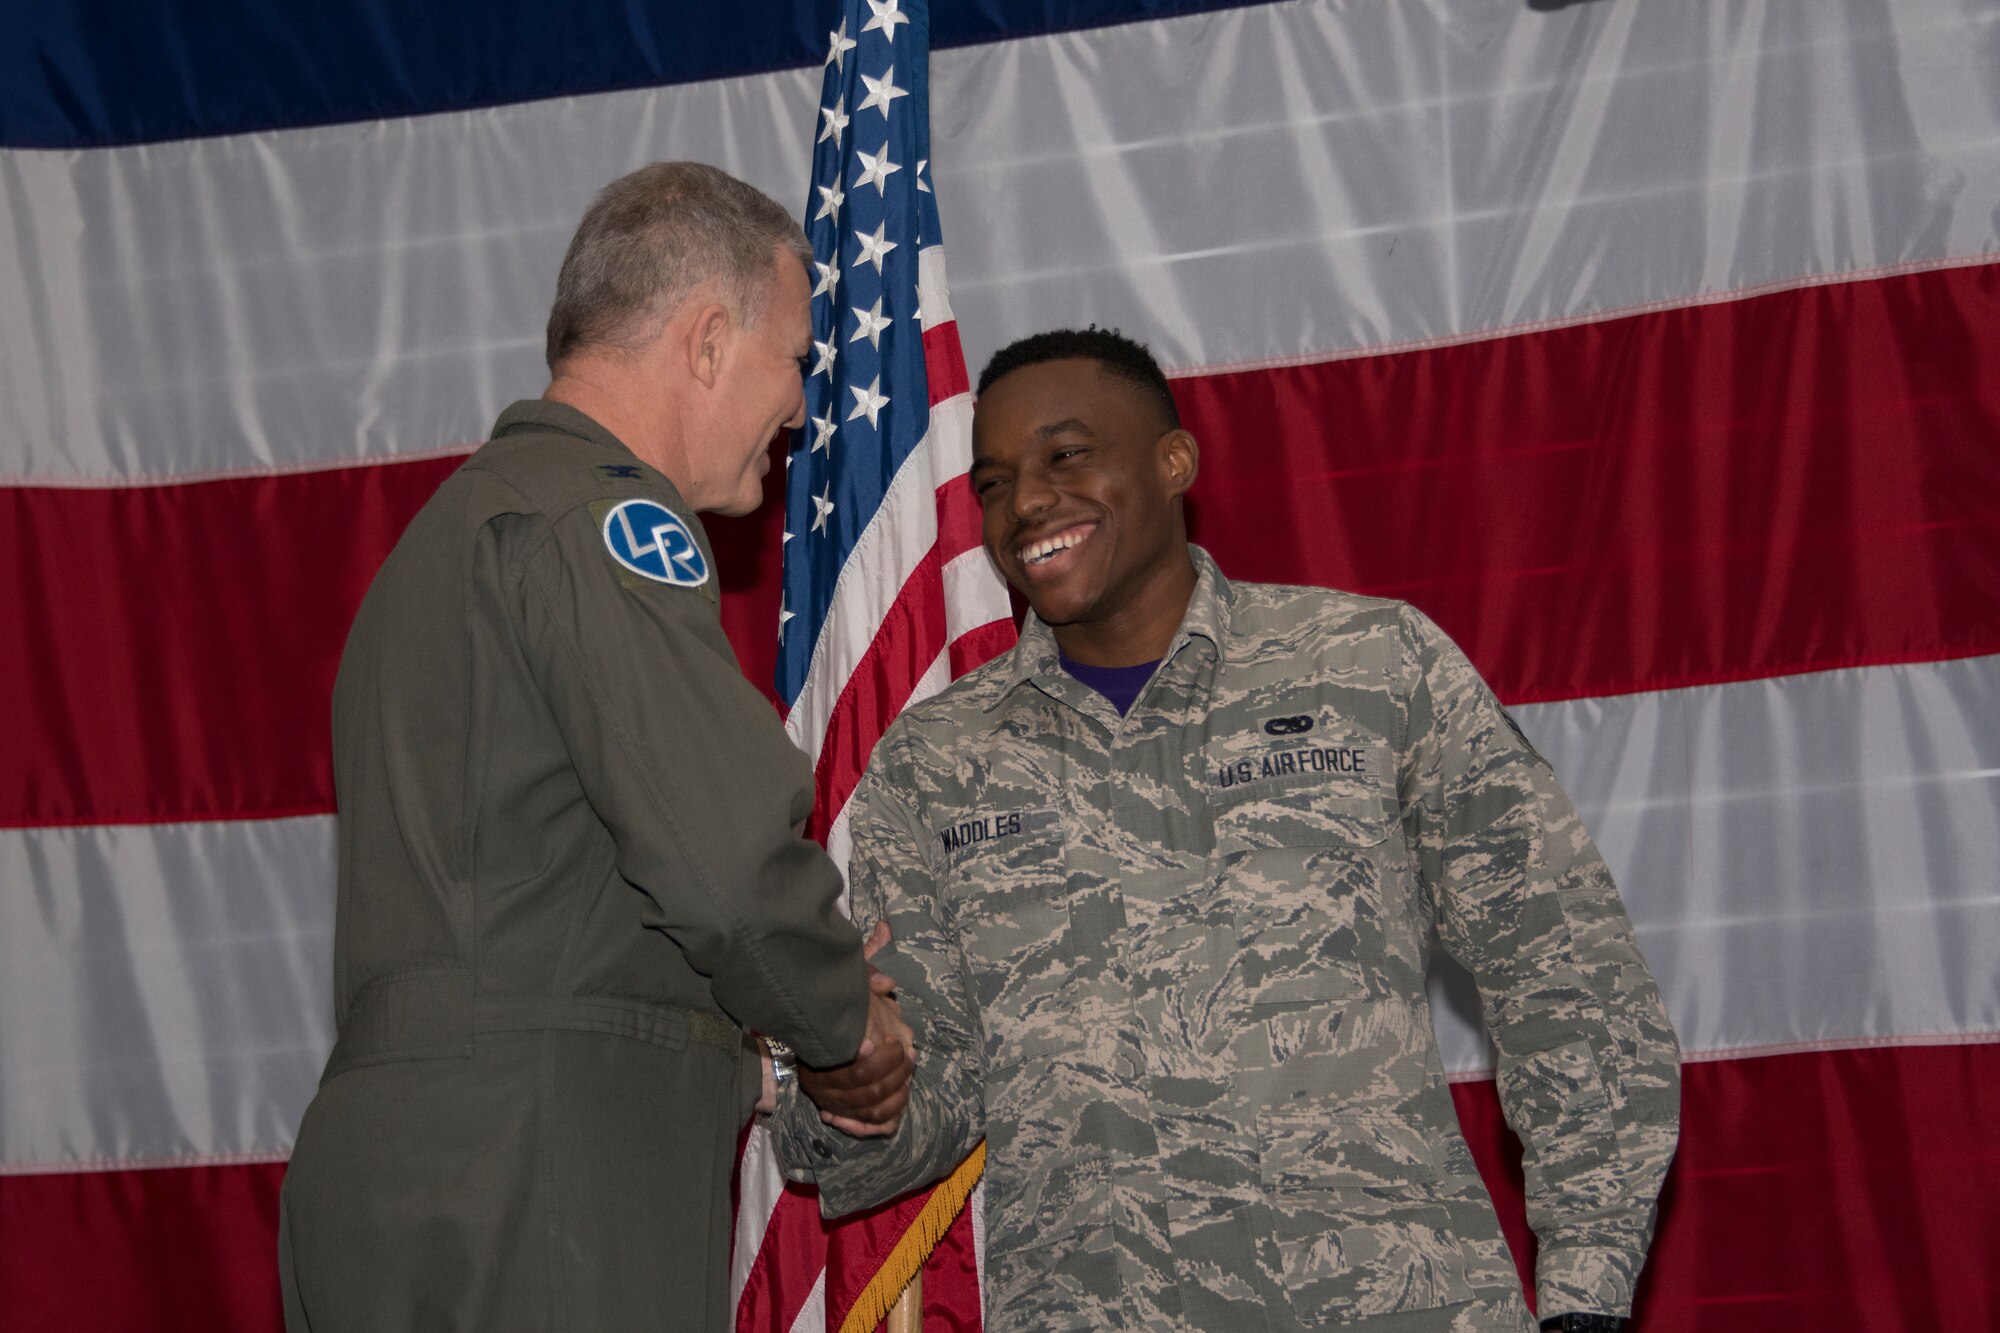 U.S. Air Force Col. Robert VanHoy, 307th Bomb Wing commander, and Chief Master Sgt. Darren Demel, 307th BW command chief, recognized three Community College of the Air Force graduates during a commander's call at Barksdale Air Force Base, Louisiana, Jan. 13, 2019.  Those receiving degrees are Tech. Sgt. John Hanks, Staff Sgt. William Monteagudo, and Staff Sgt. Trevor Talbert. (U.S. Air Force photo by Airman 1st Class Maxwell Daigle)